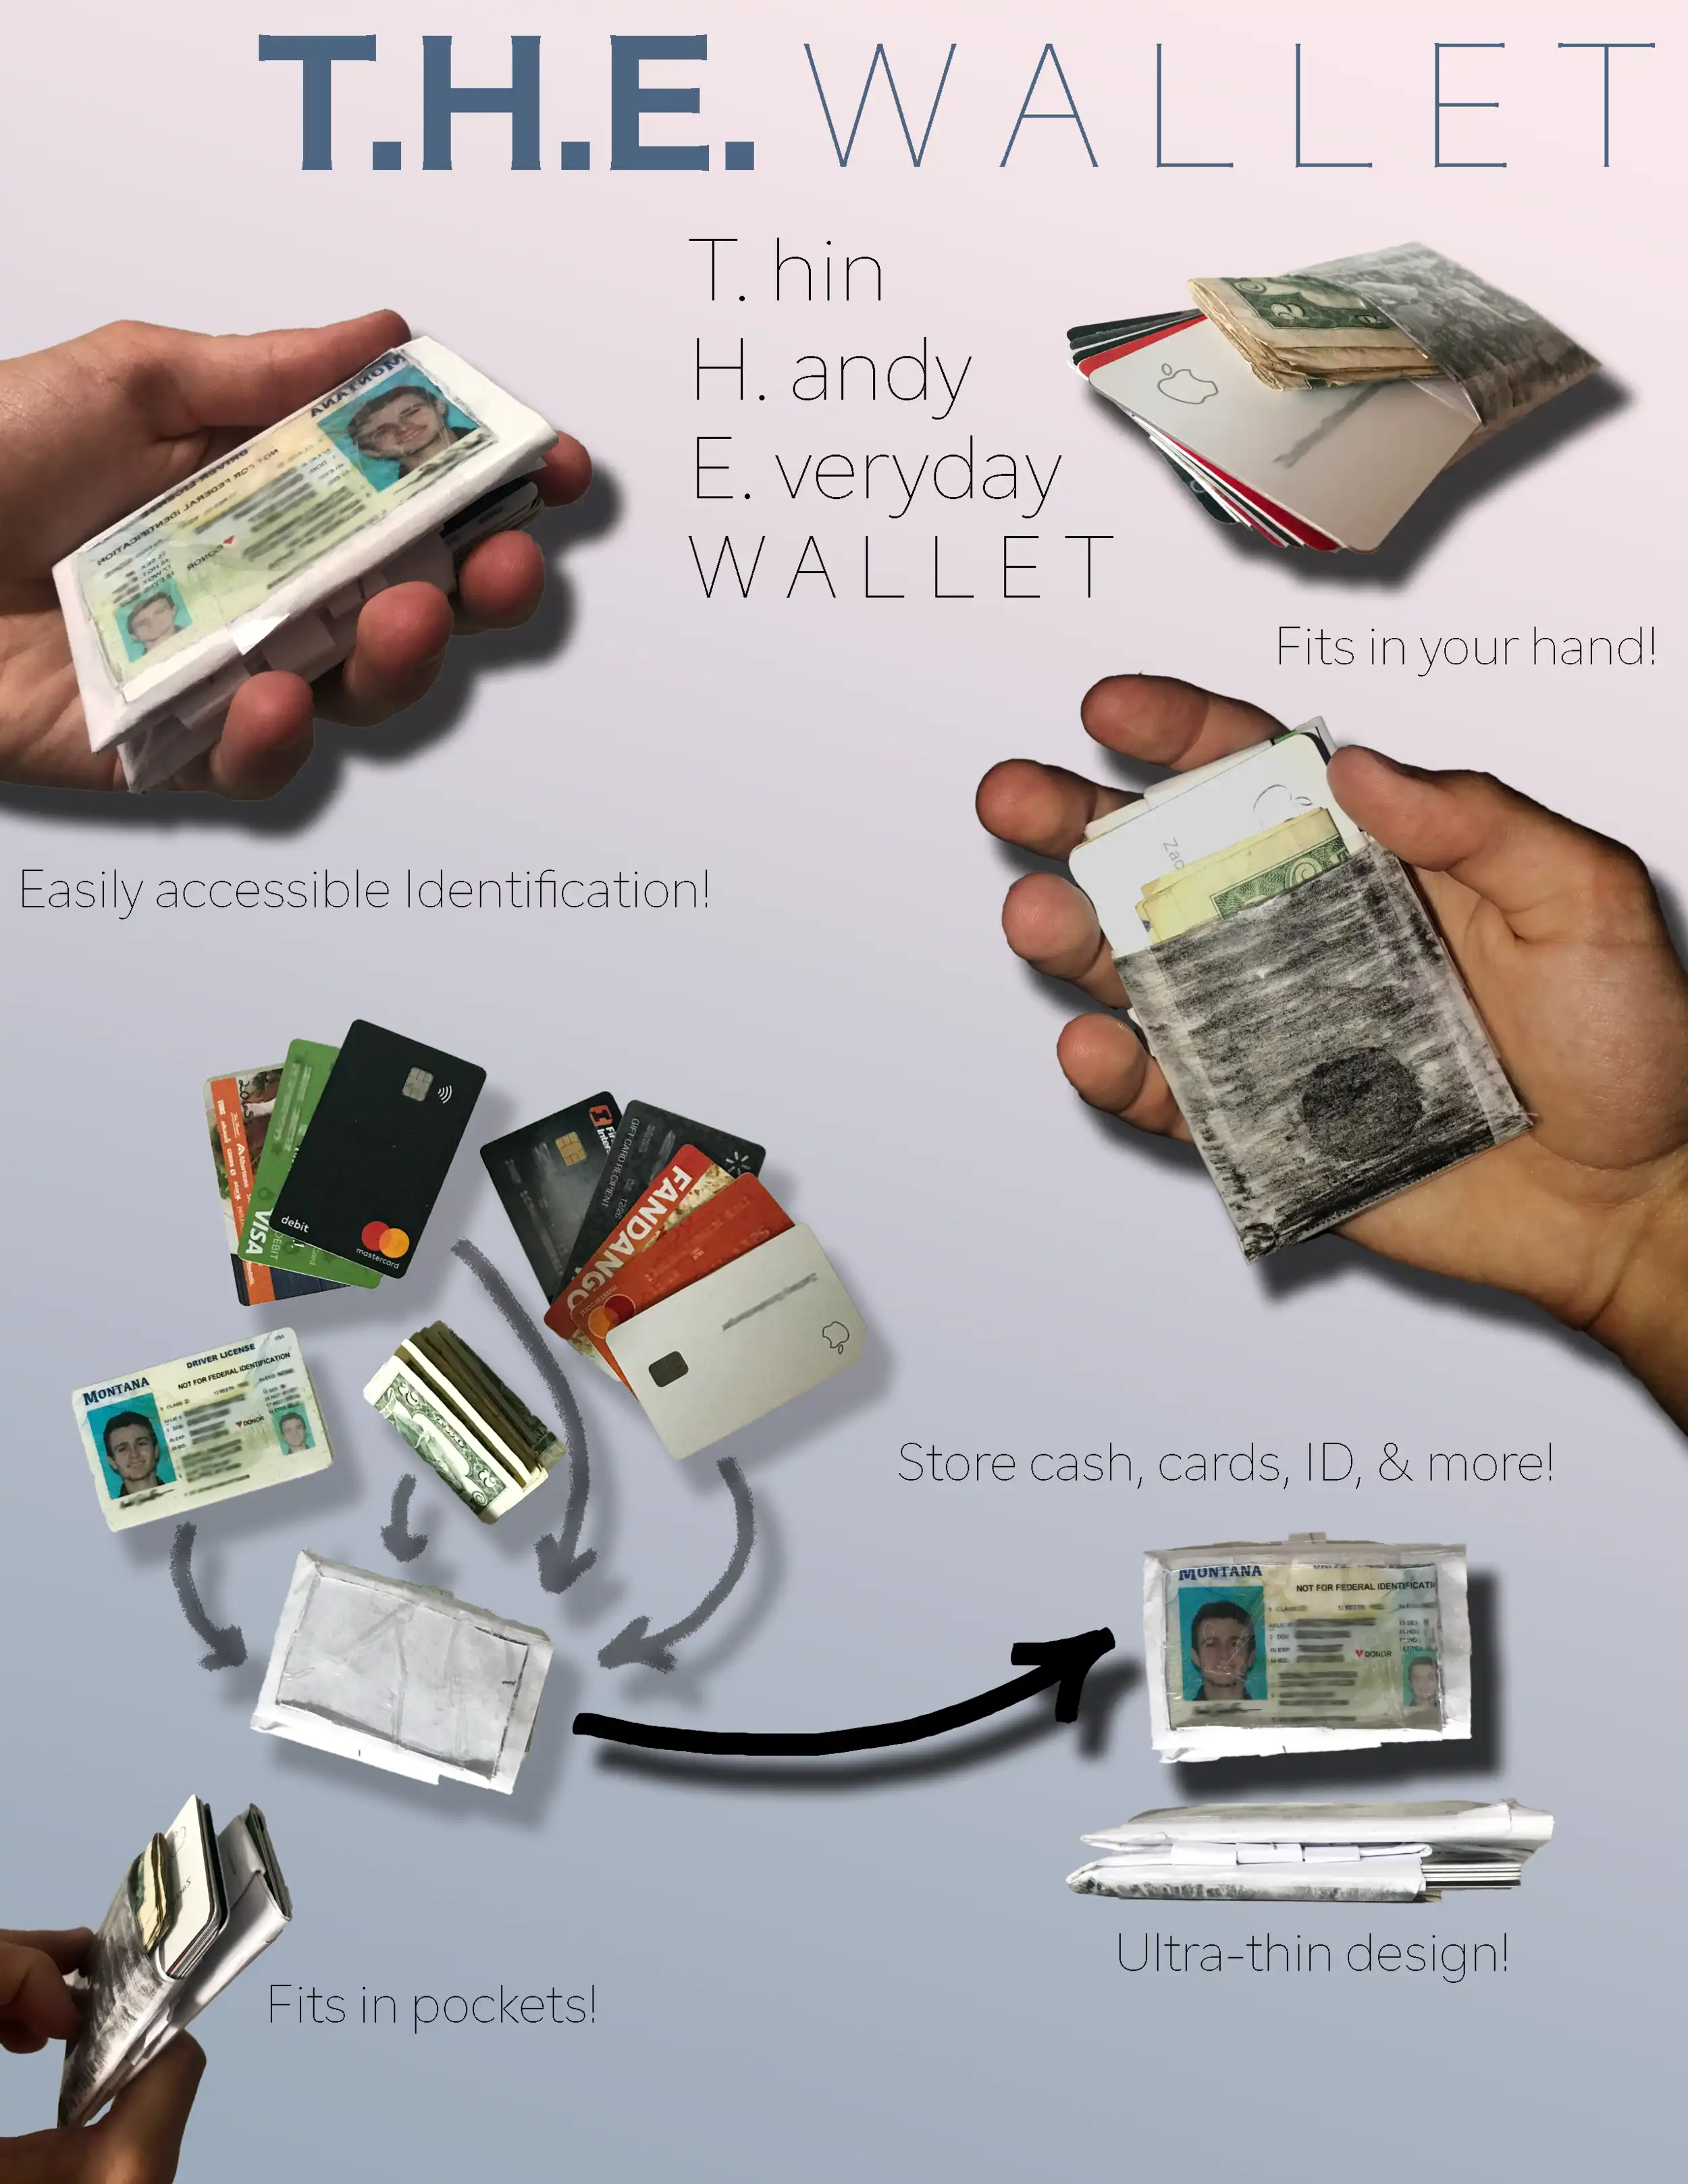 T.H.E. Wallet infographic